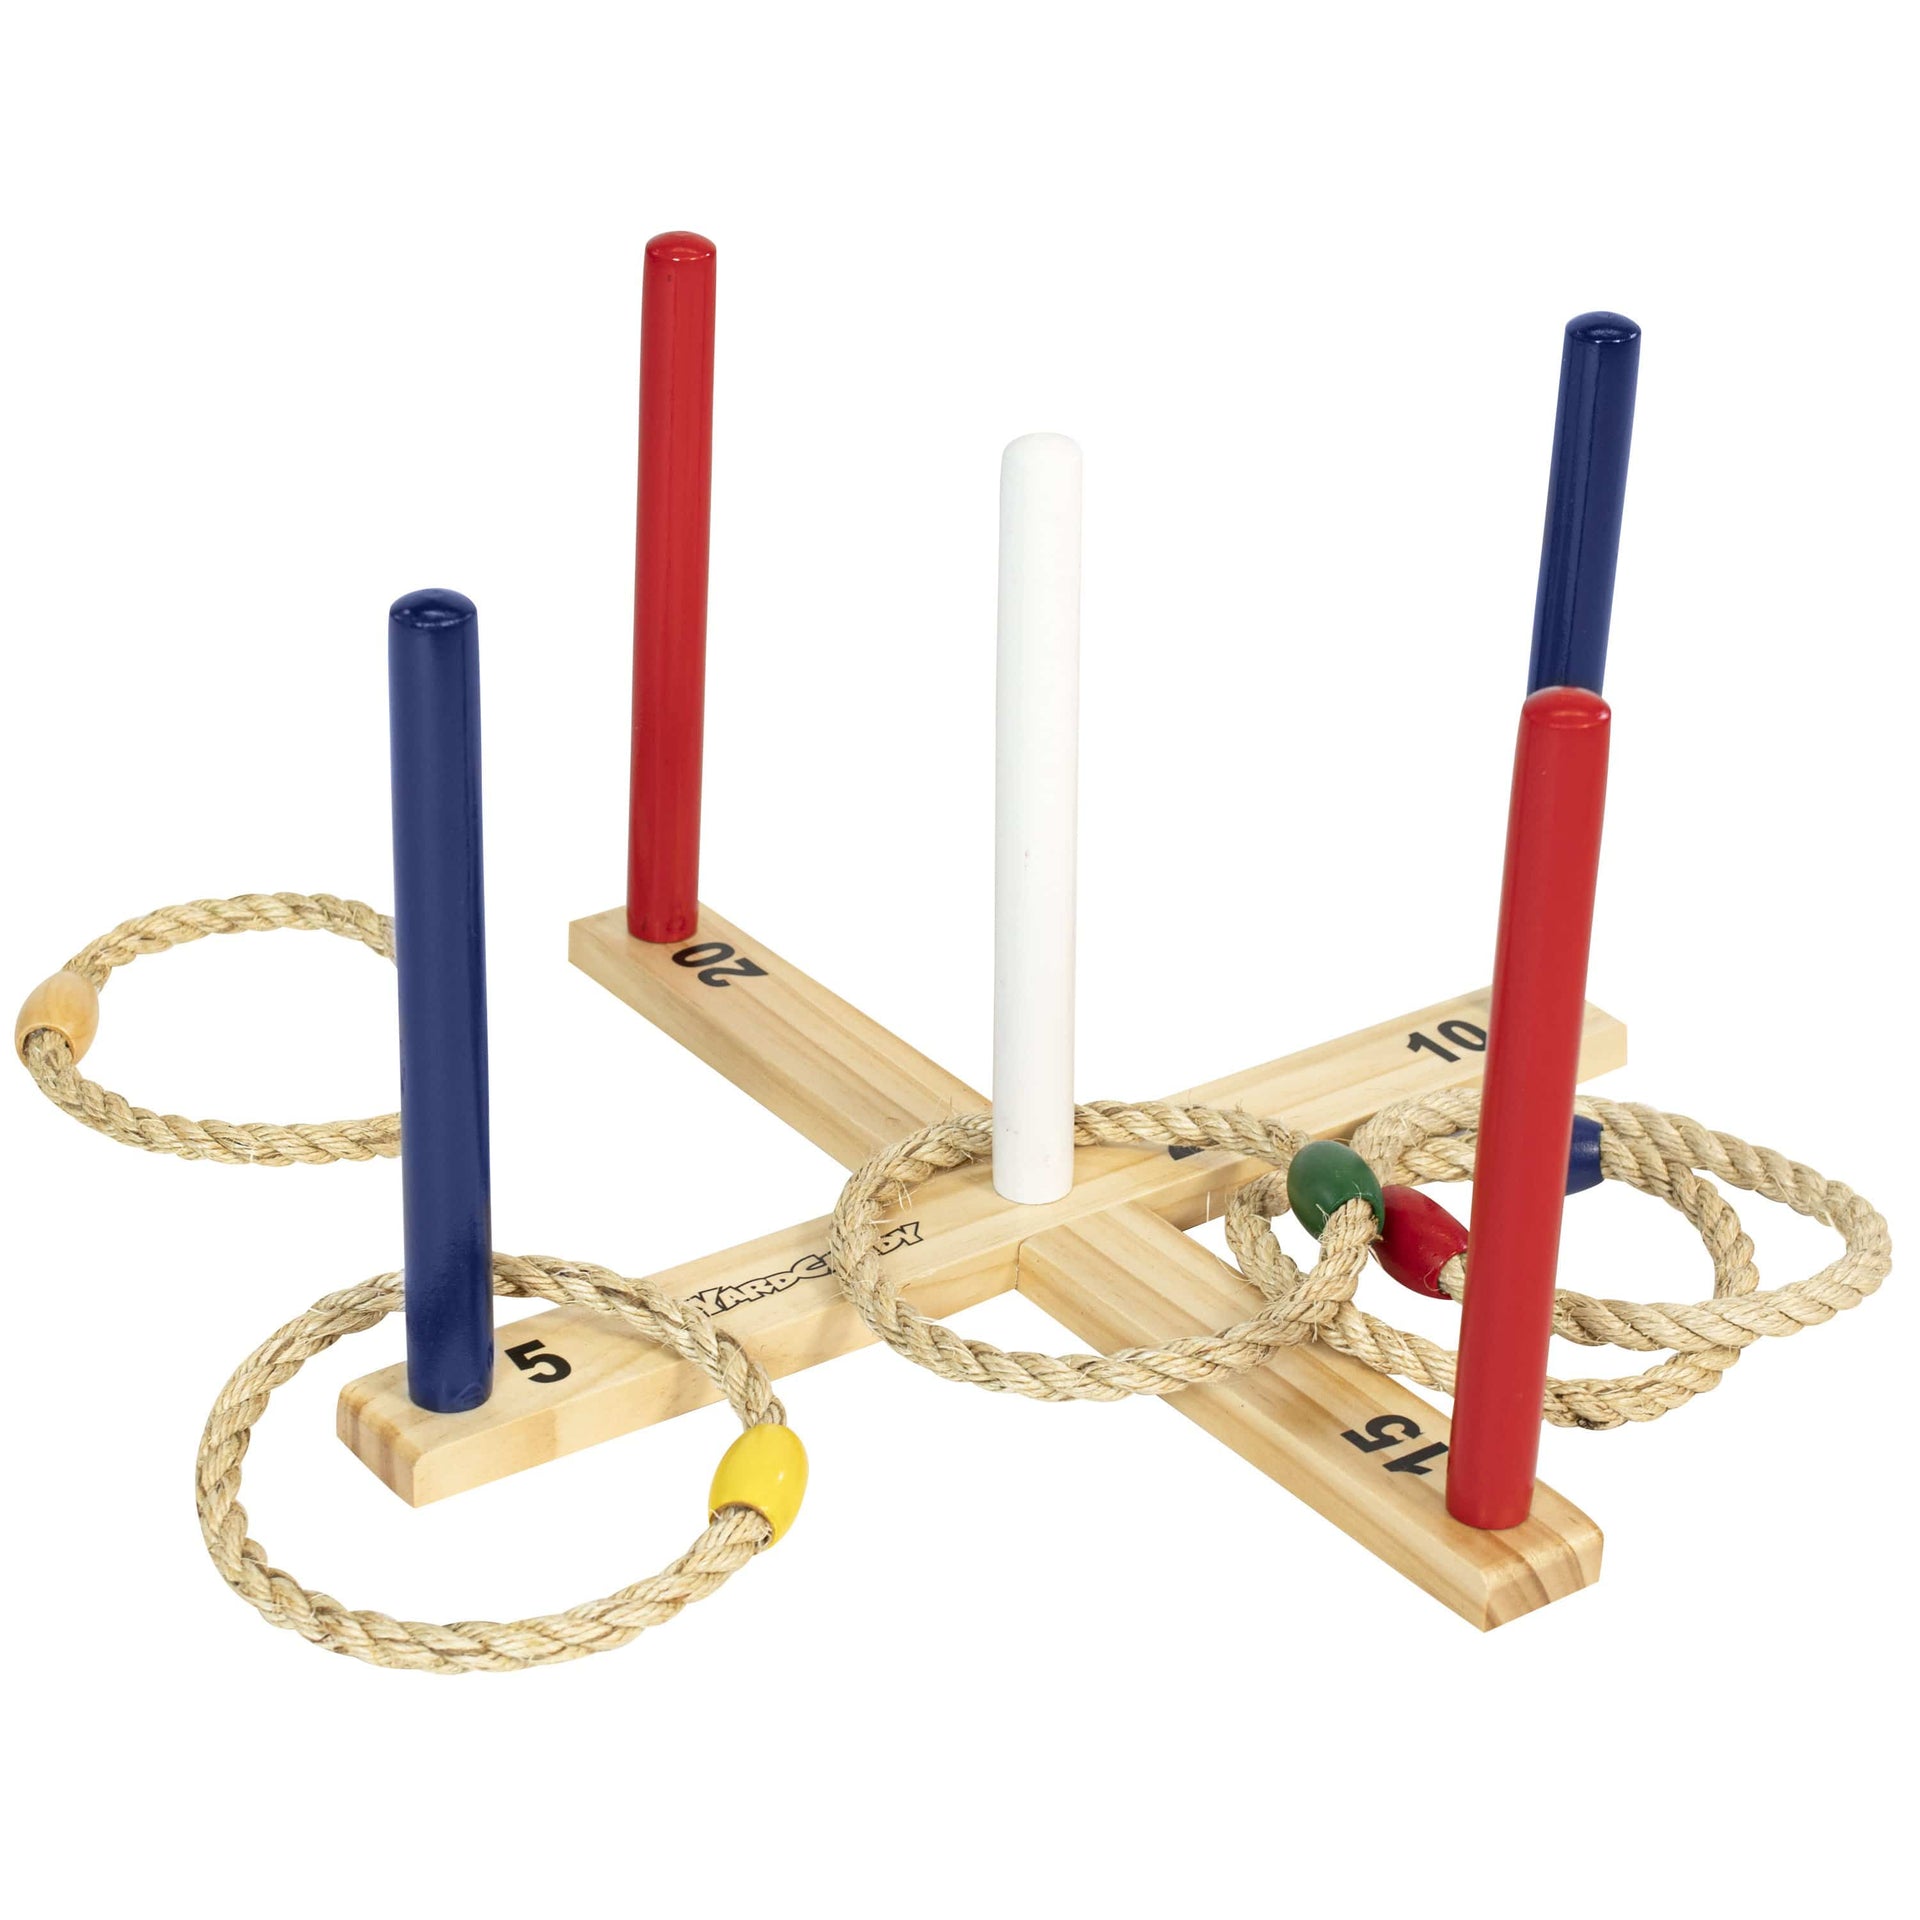 Evergreen Outdoor Wood Ring Toss Game Set